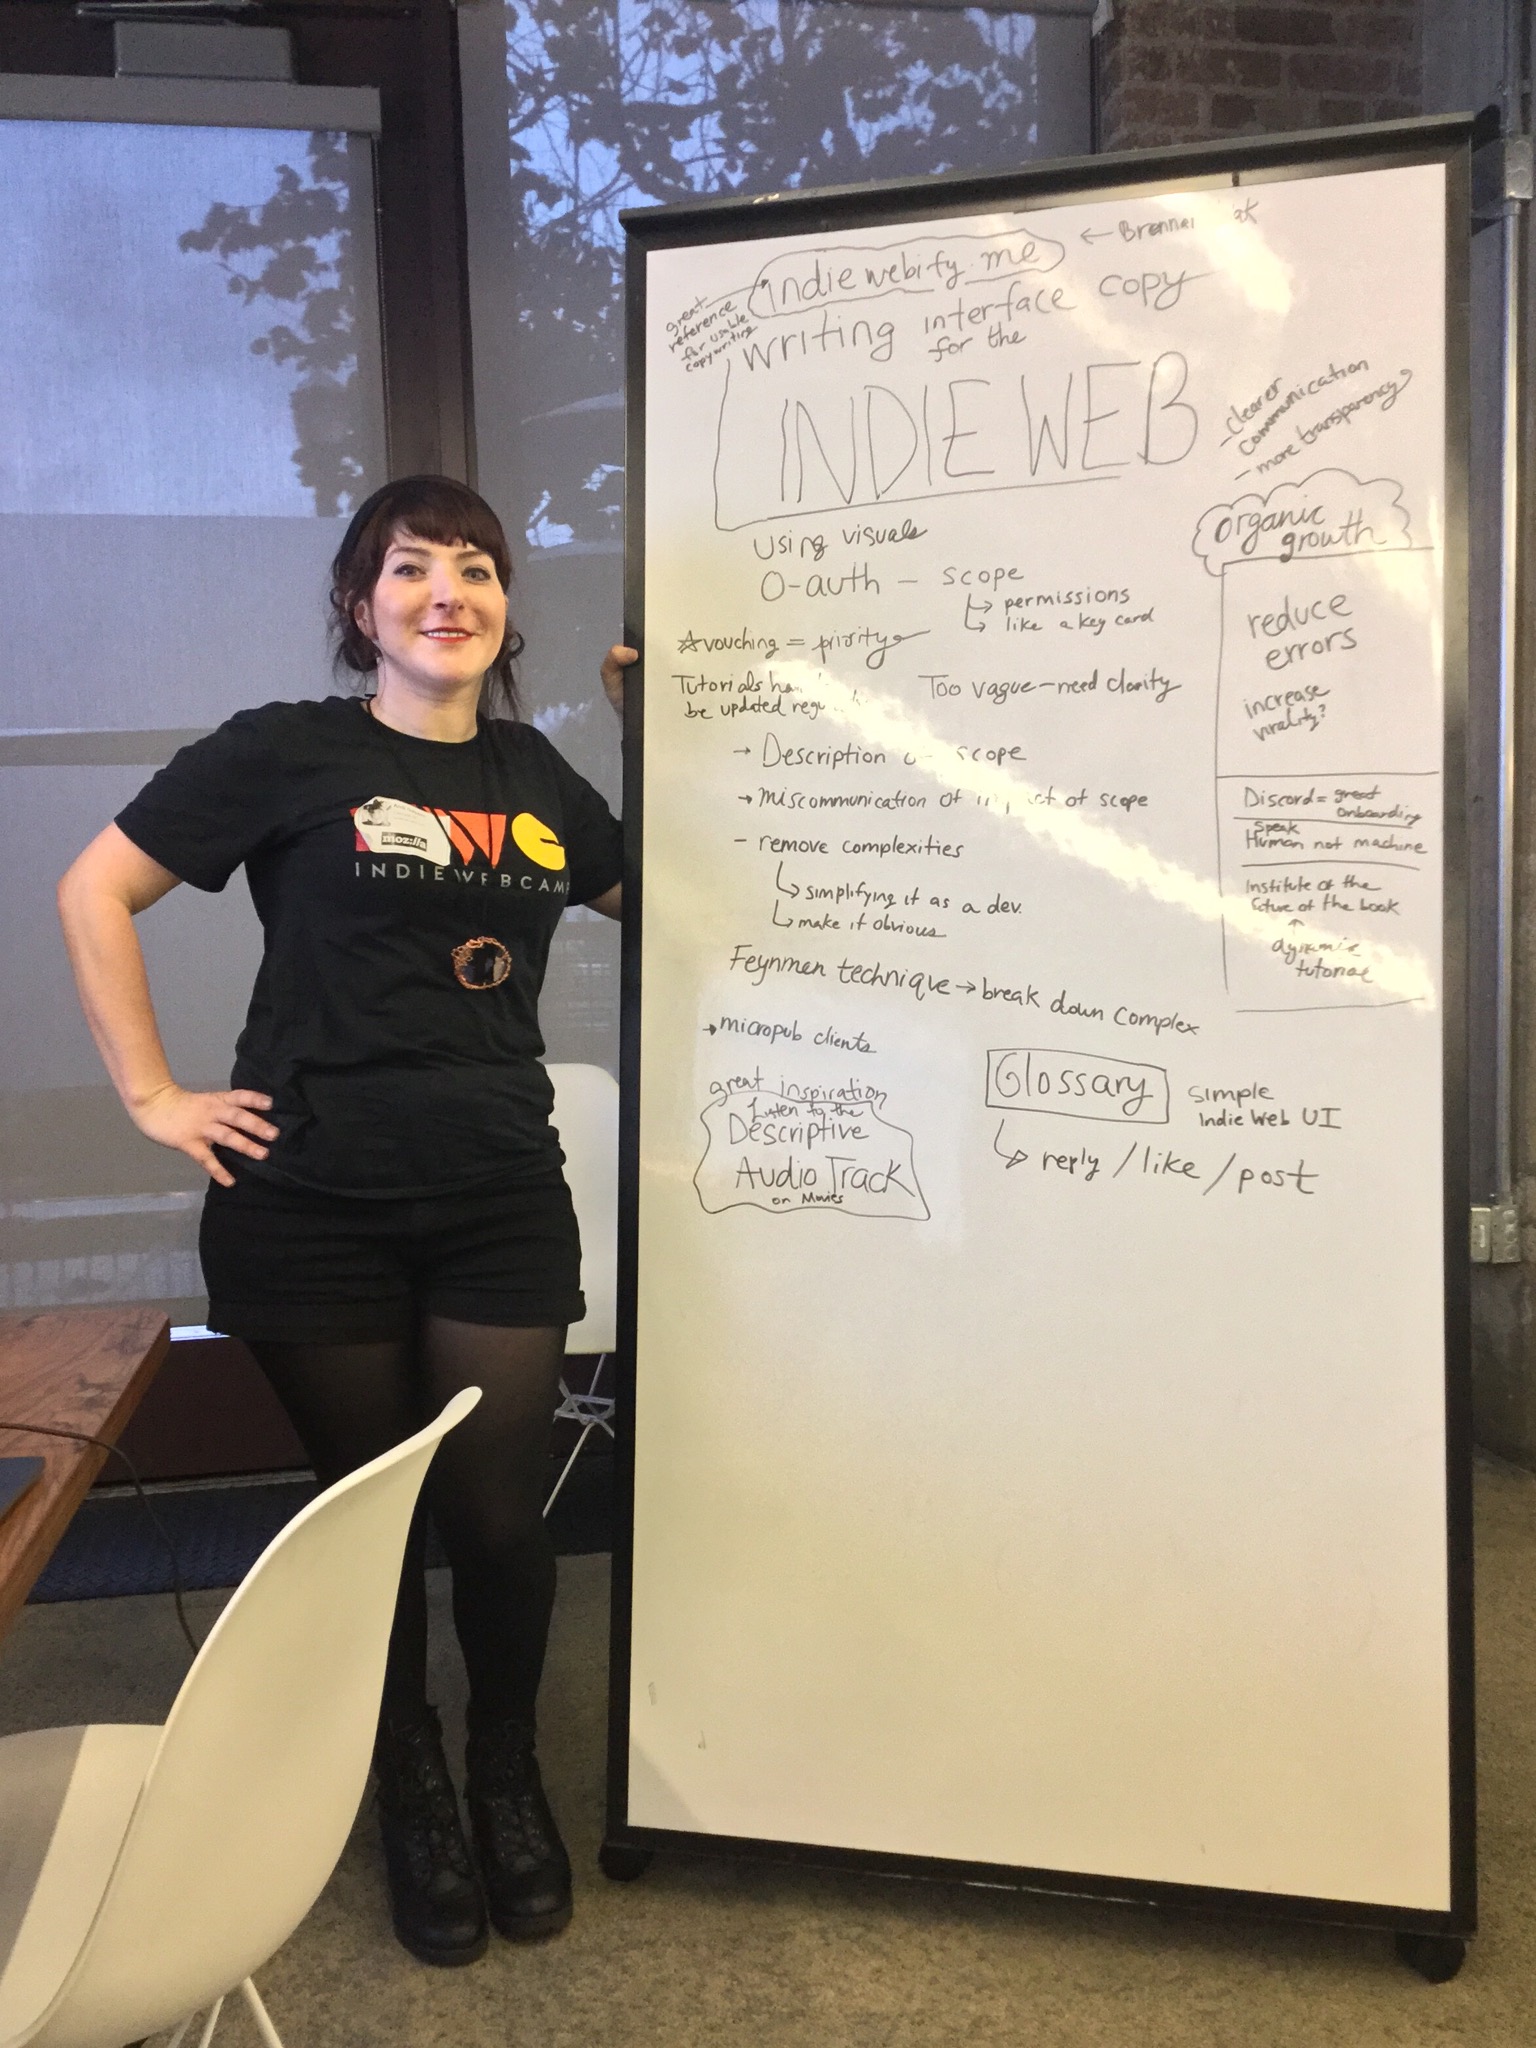 Andi Galpern leading a discussion session on good copywriting for the IndieWeb at IndieWebCamp San Francisco at Mozilla’s offices there.